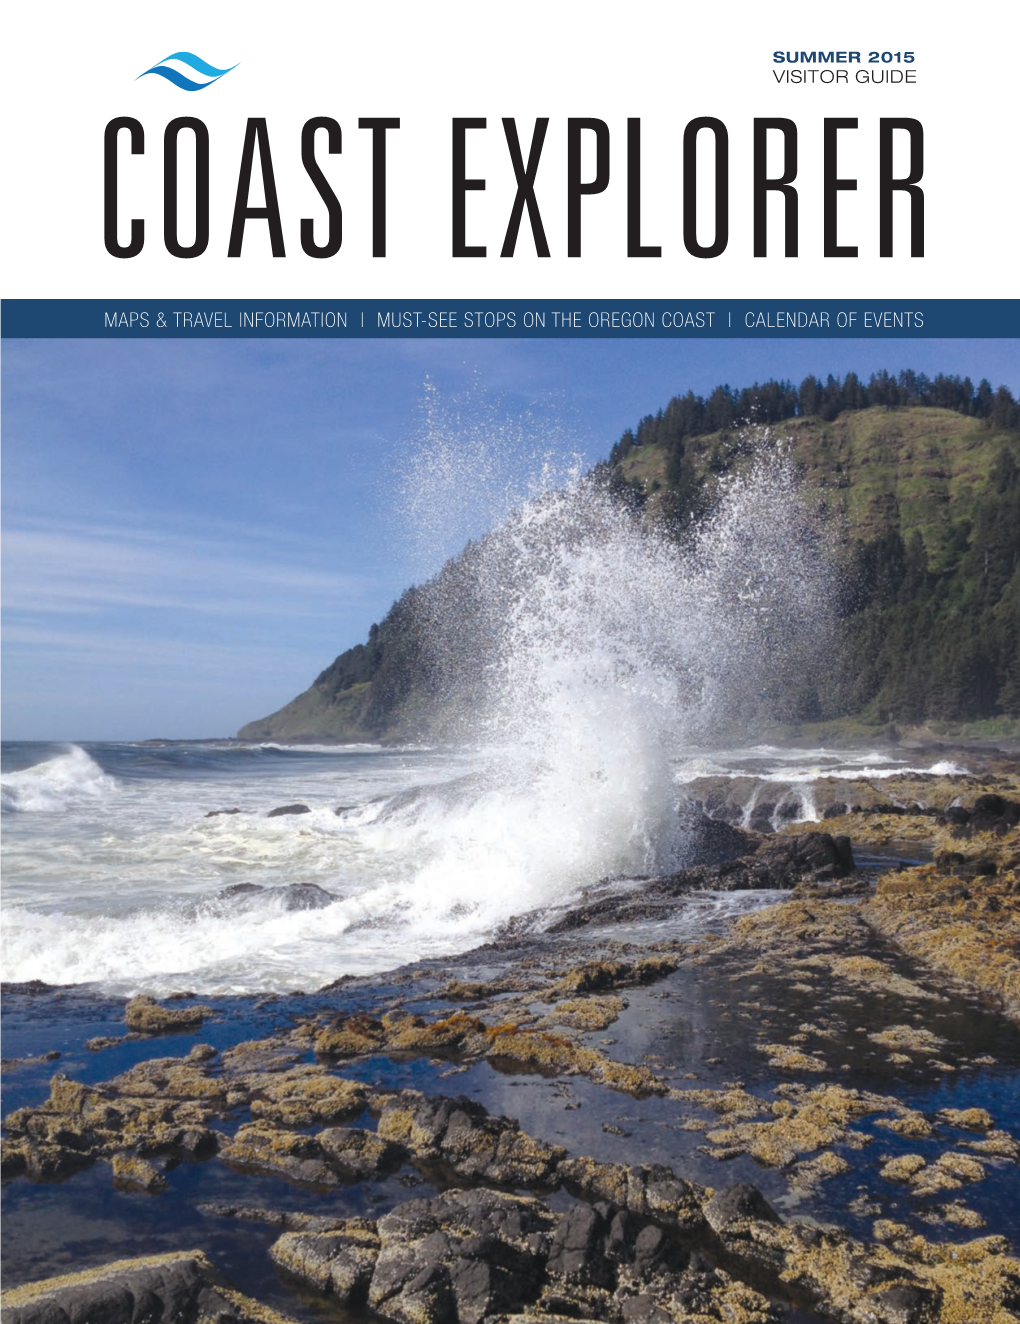 Must-See Stops on the Oregon Coast | Calendar of Events